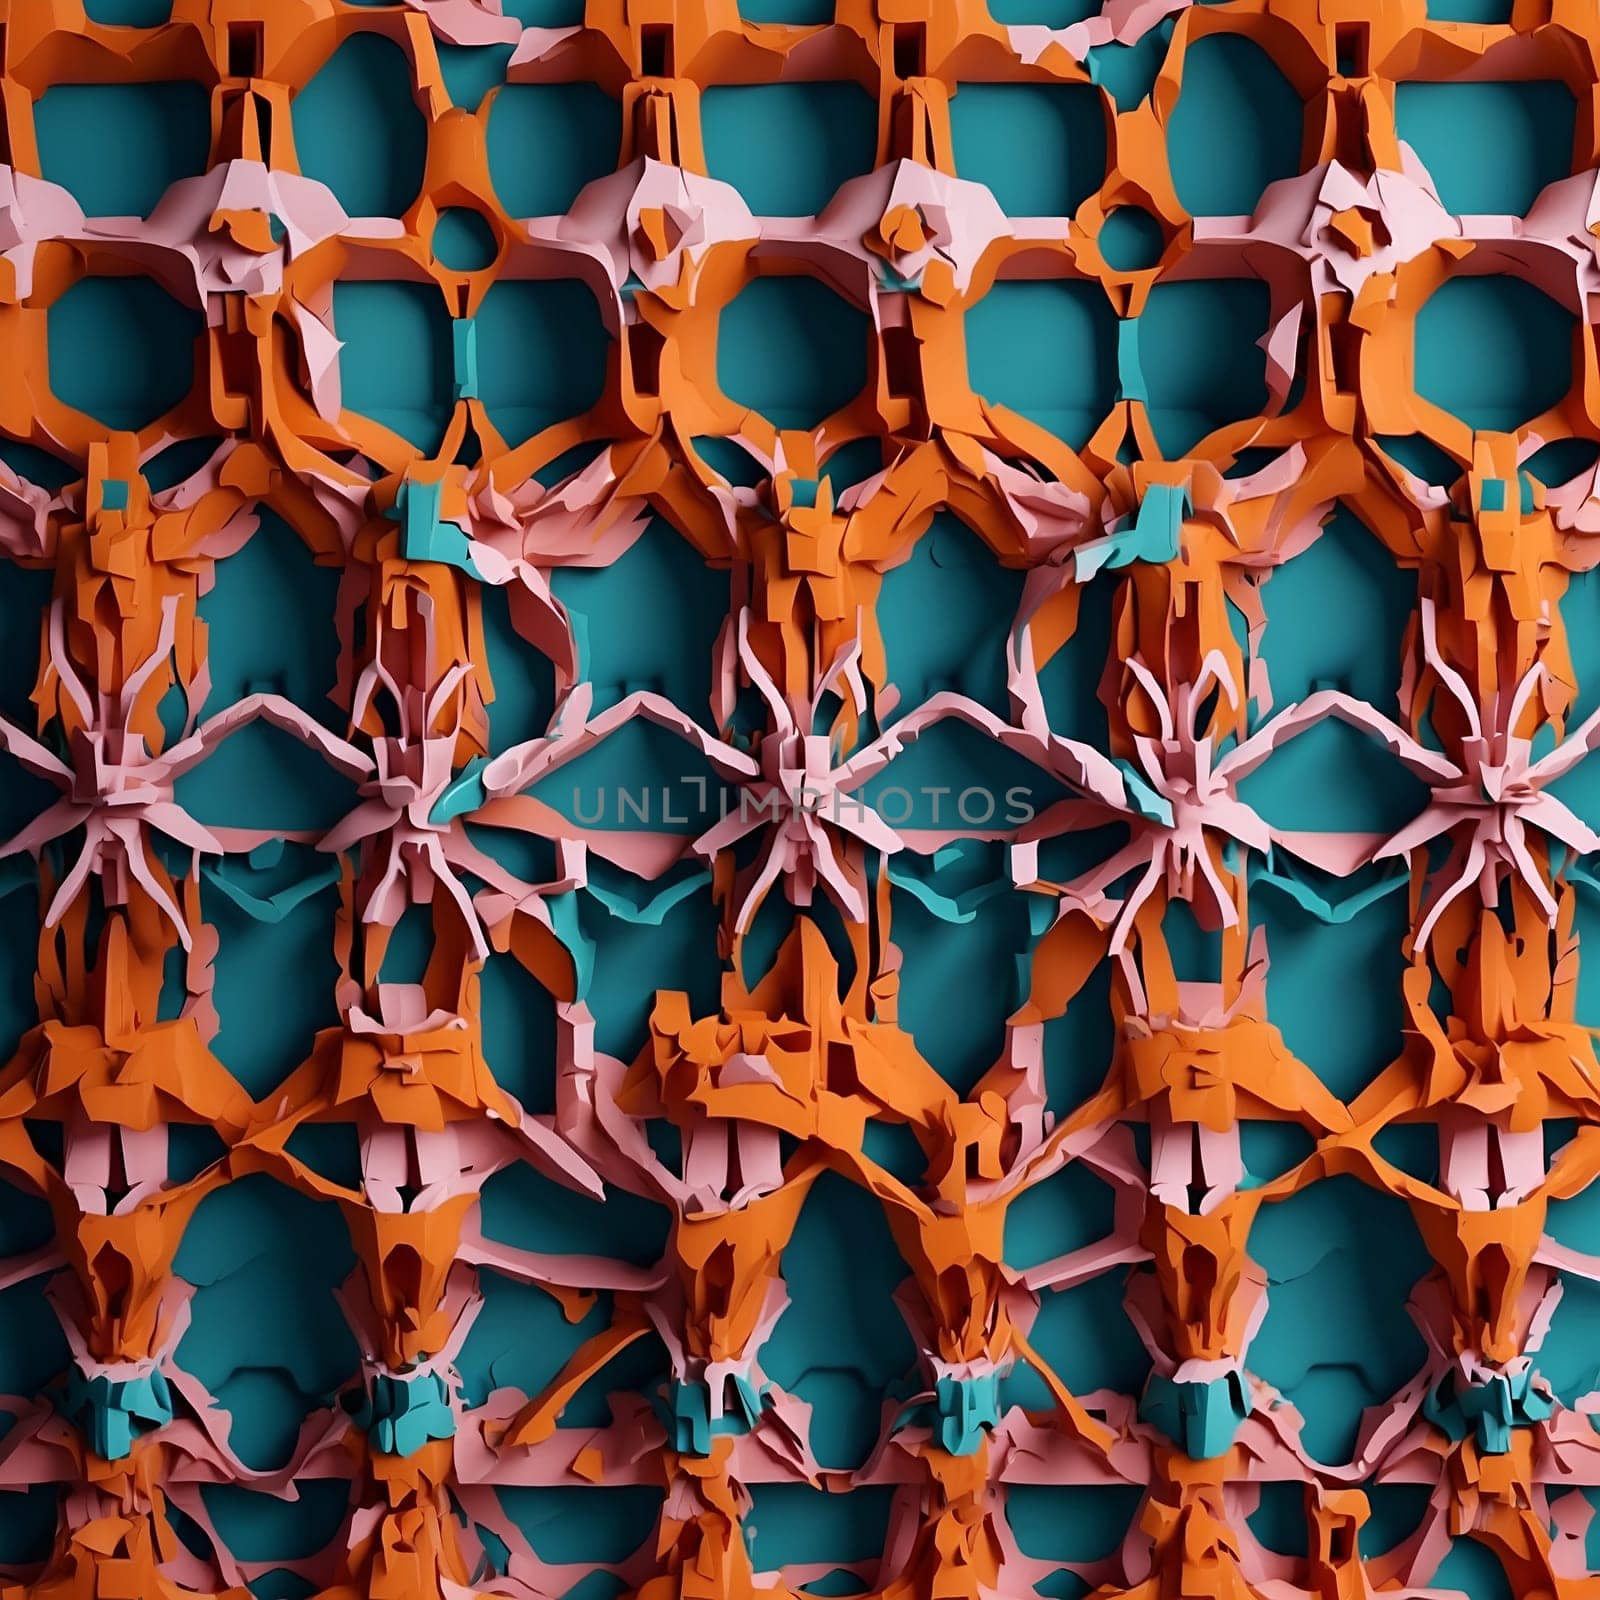 A detailed view of a wall created using a seamless pattern of orange and pink pieces of paper.